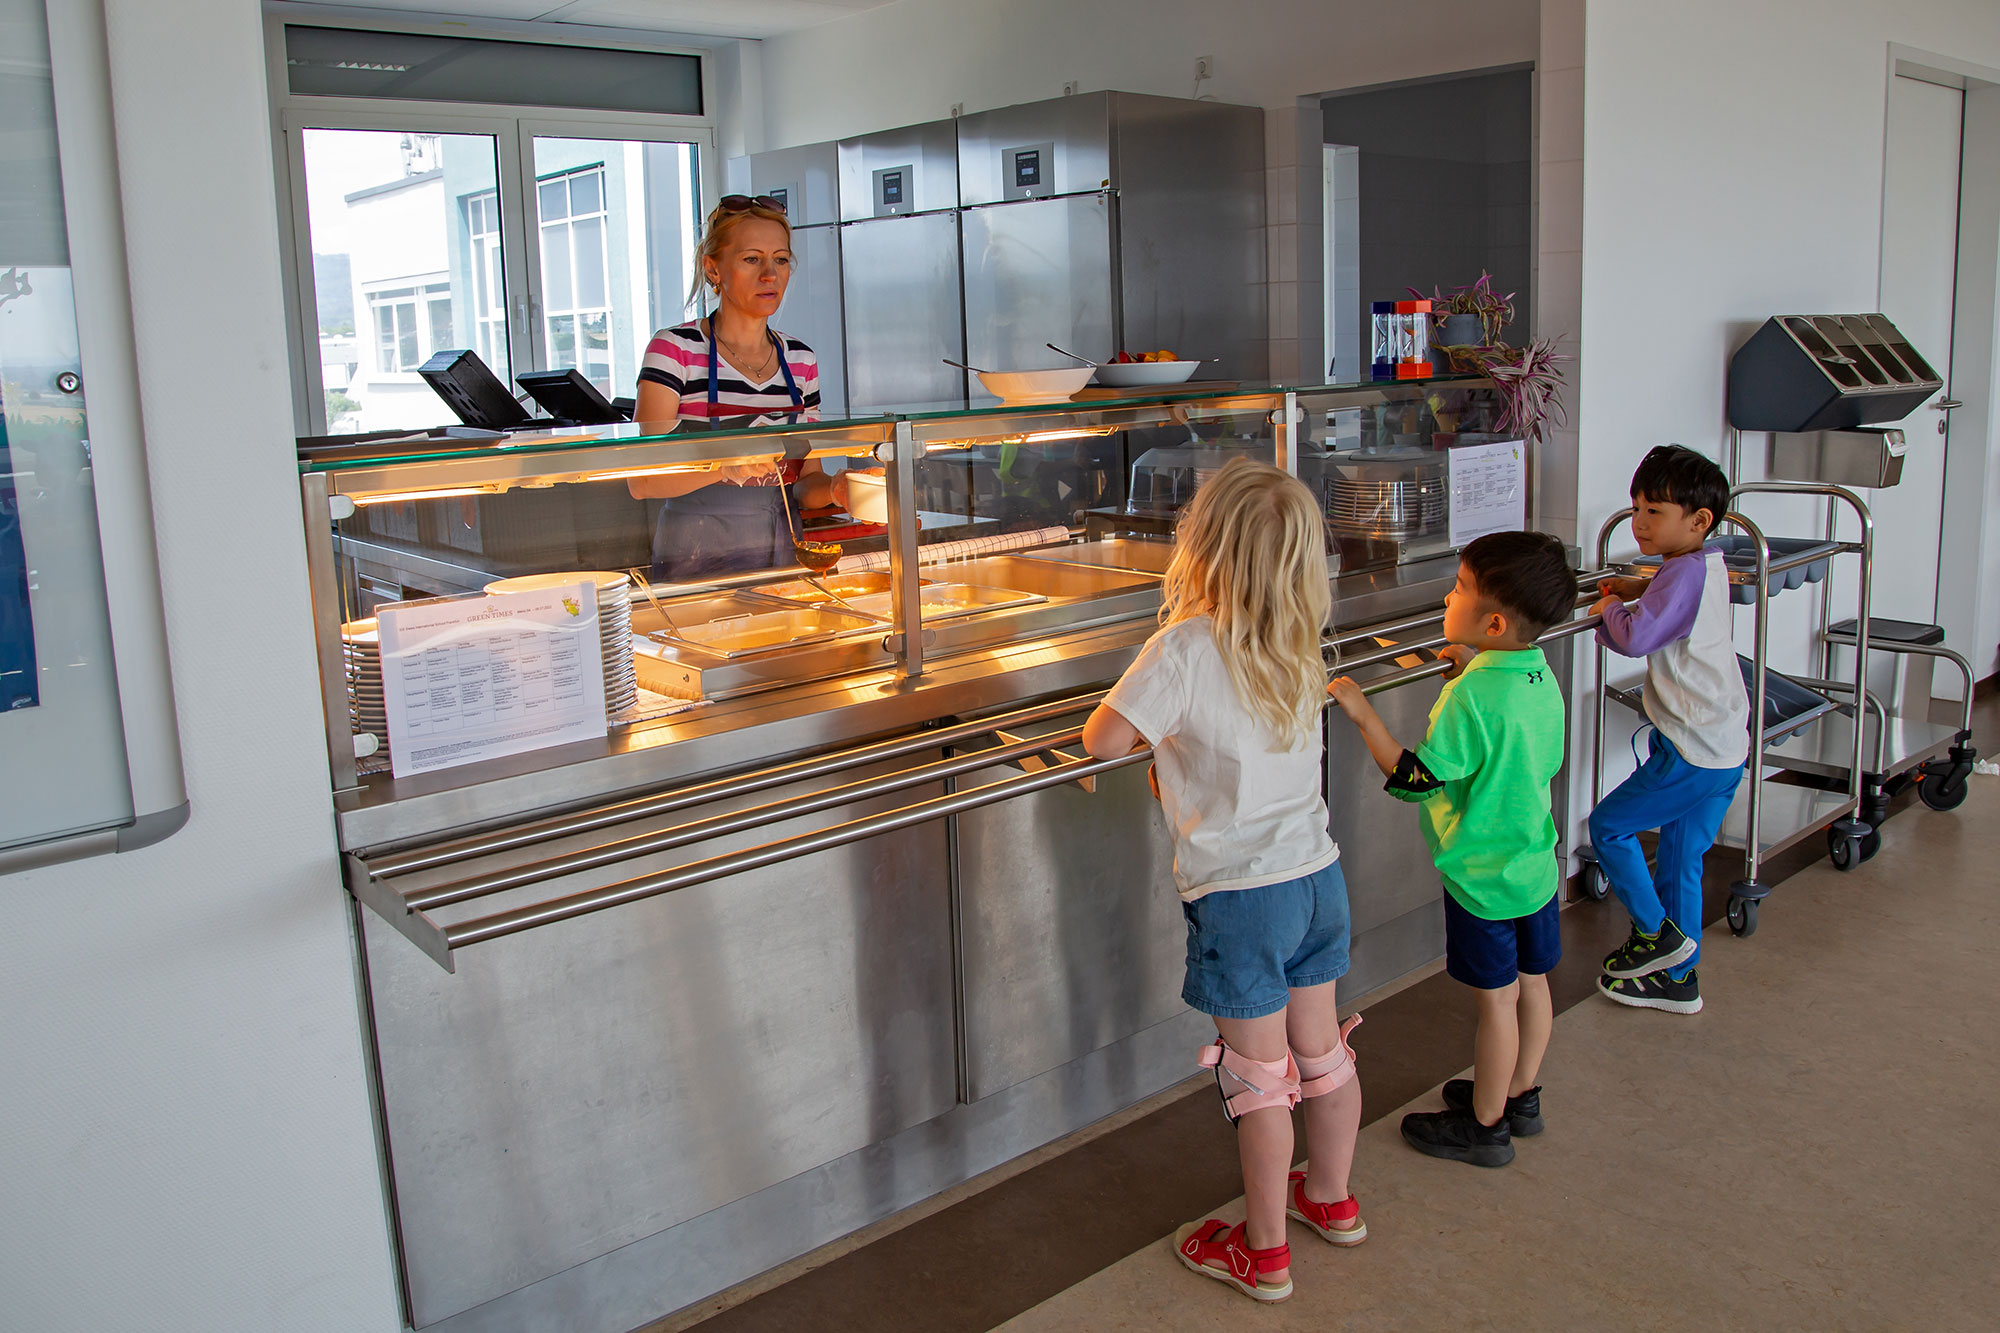 Three kids are standing in a line for a meal in the canteen.